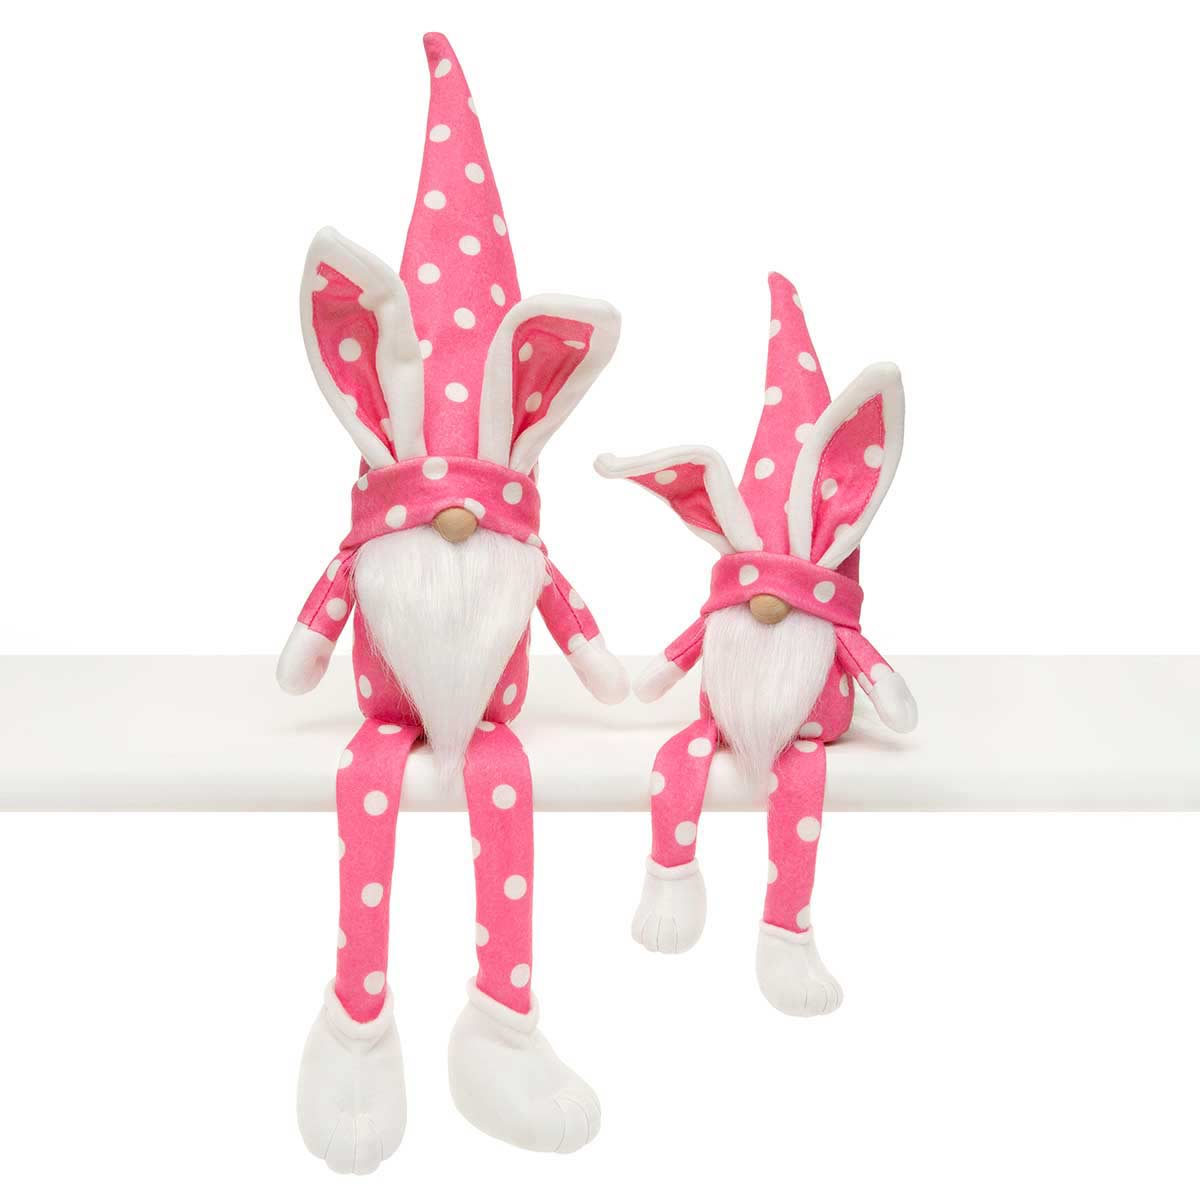 b70 GNOME DOT BUNNY LEGS LARGE 4.5IN X 5IN X 20.5IN PINK/WHITE